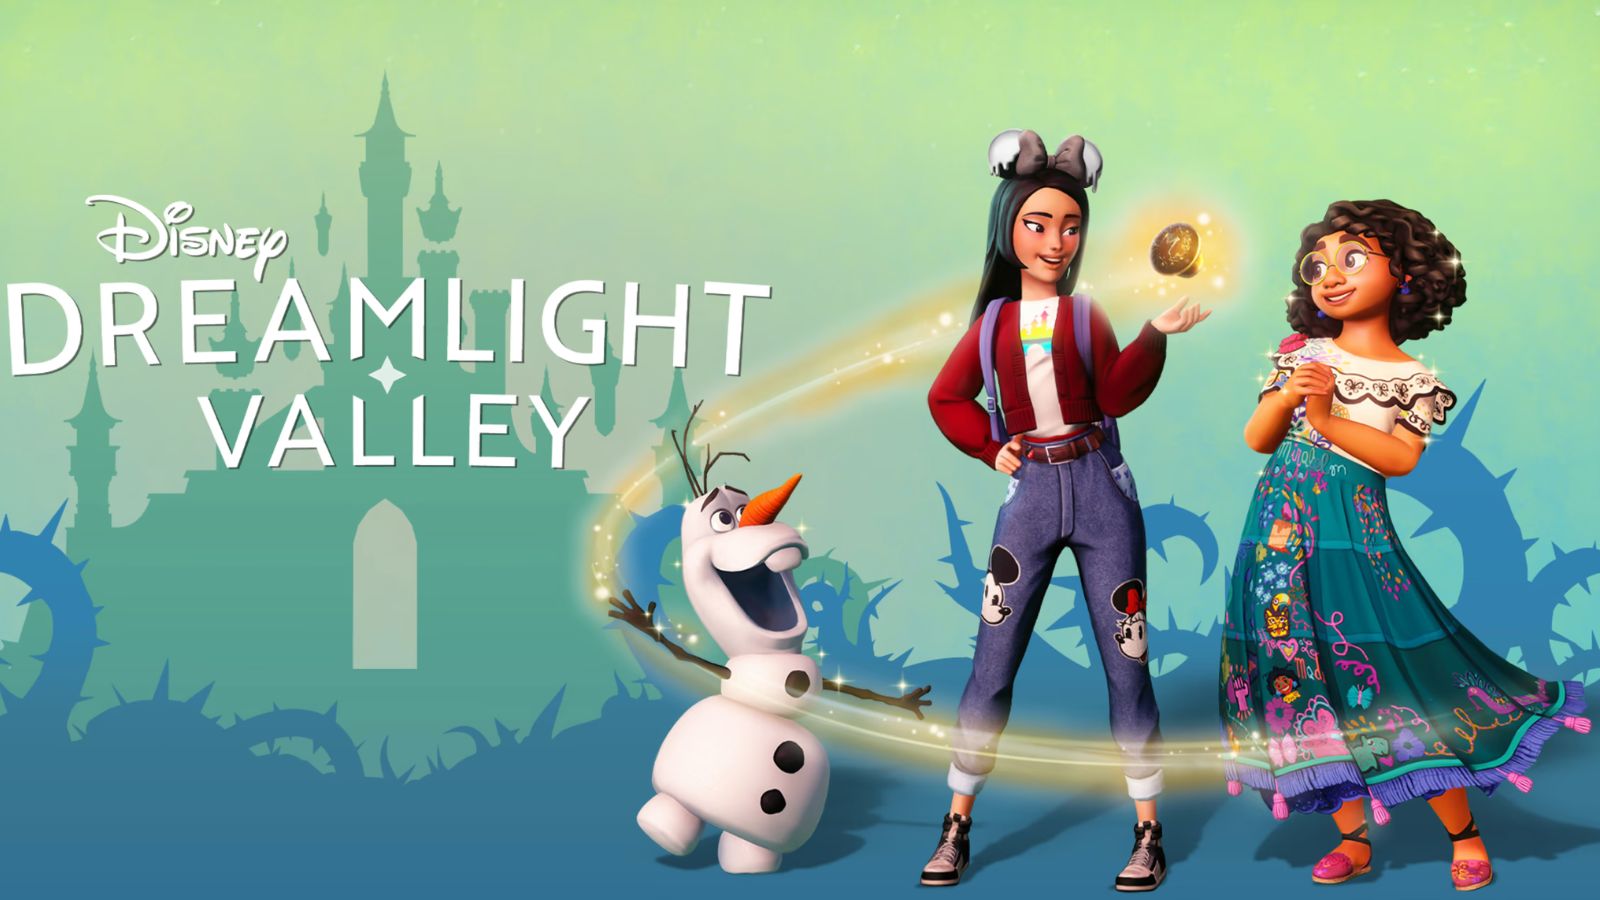 Disney Dreamlight Valley character roster may be increasing soon